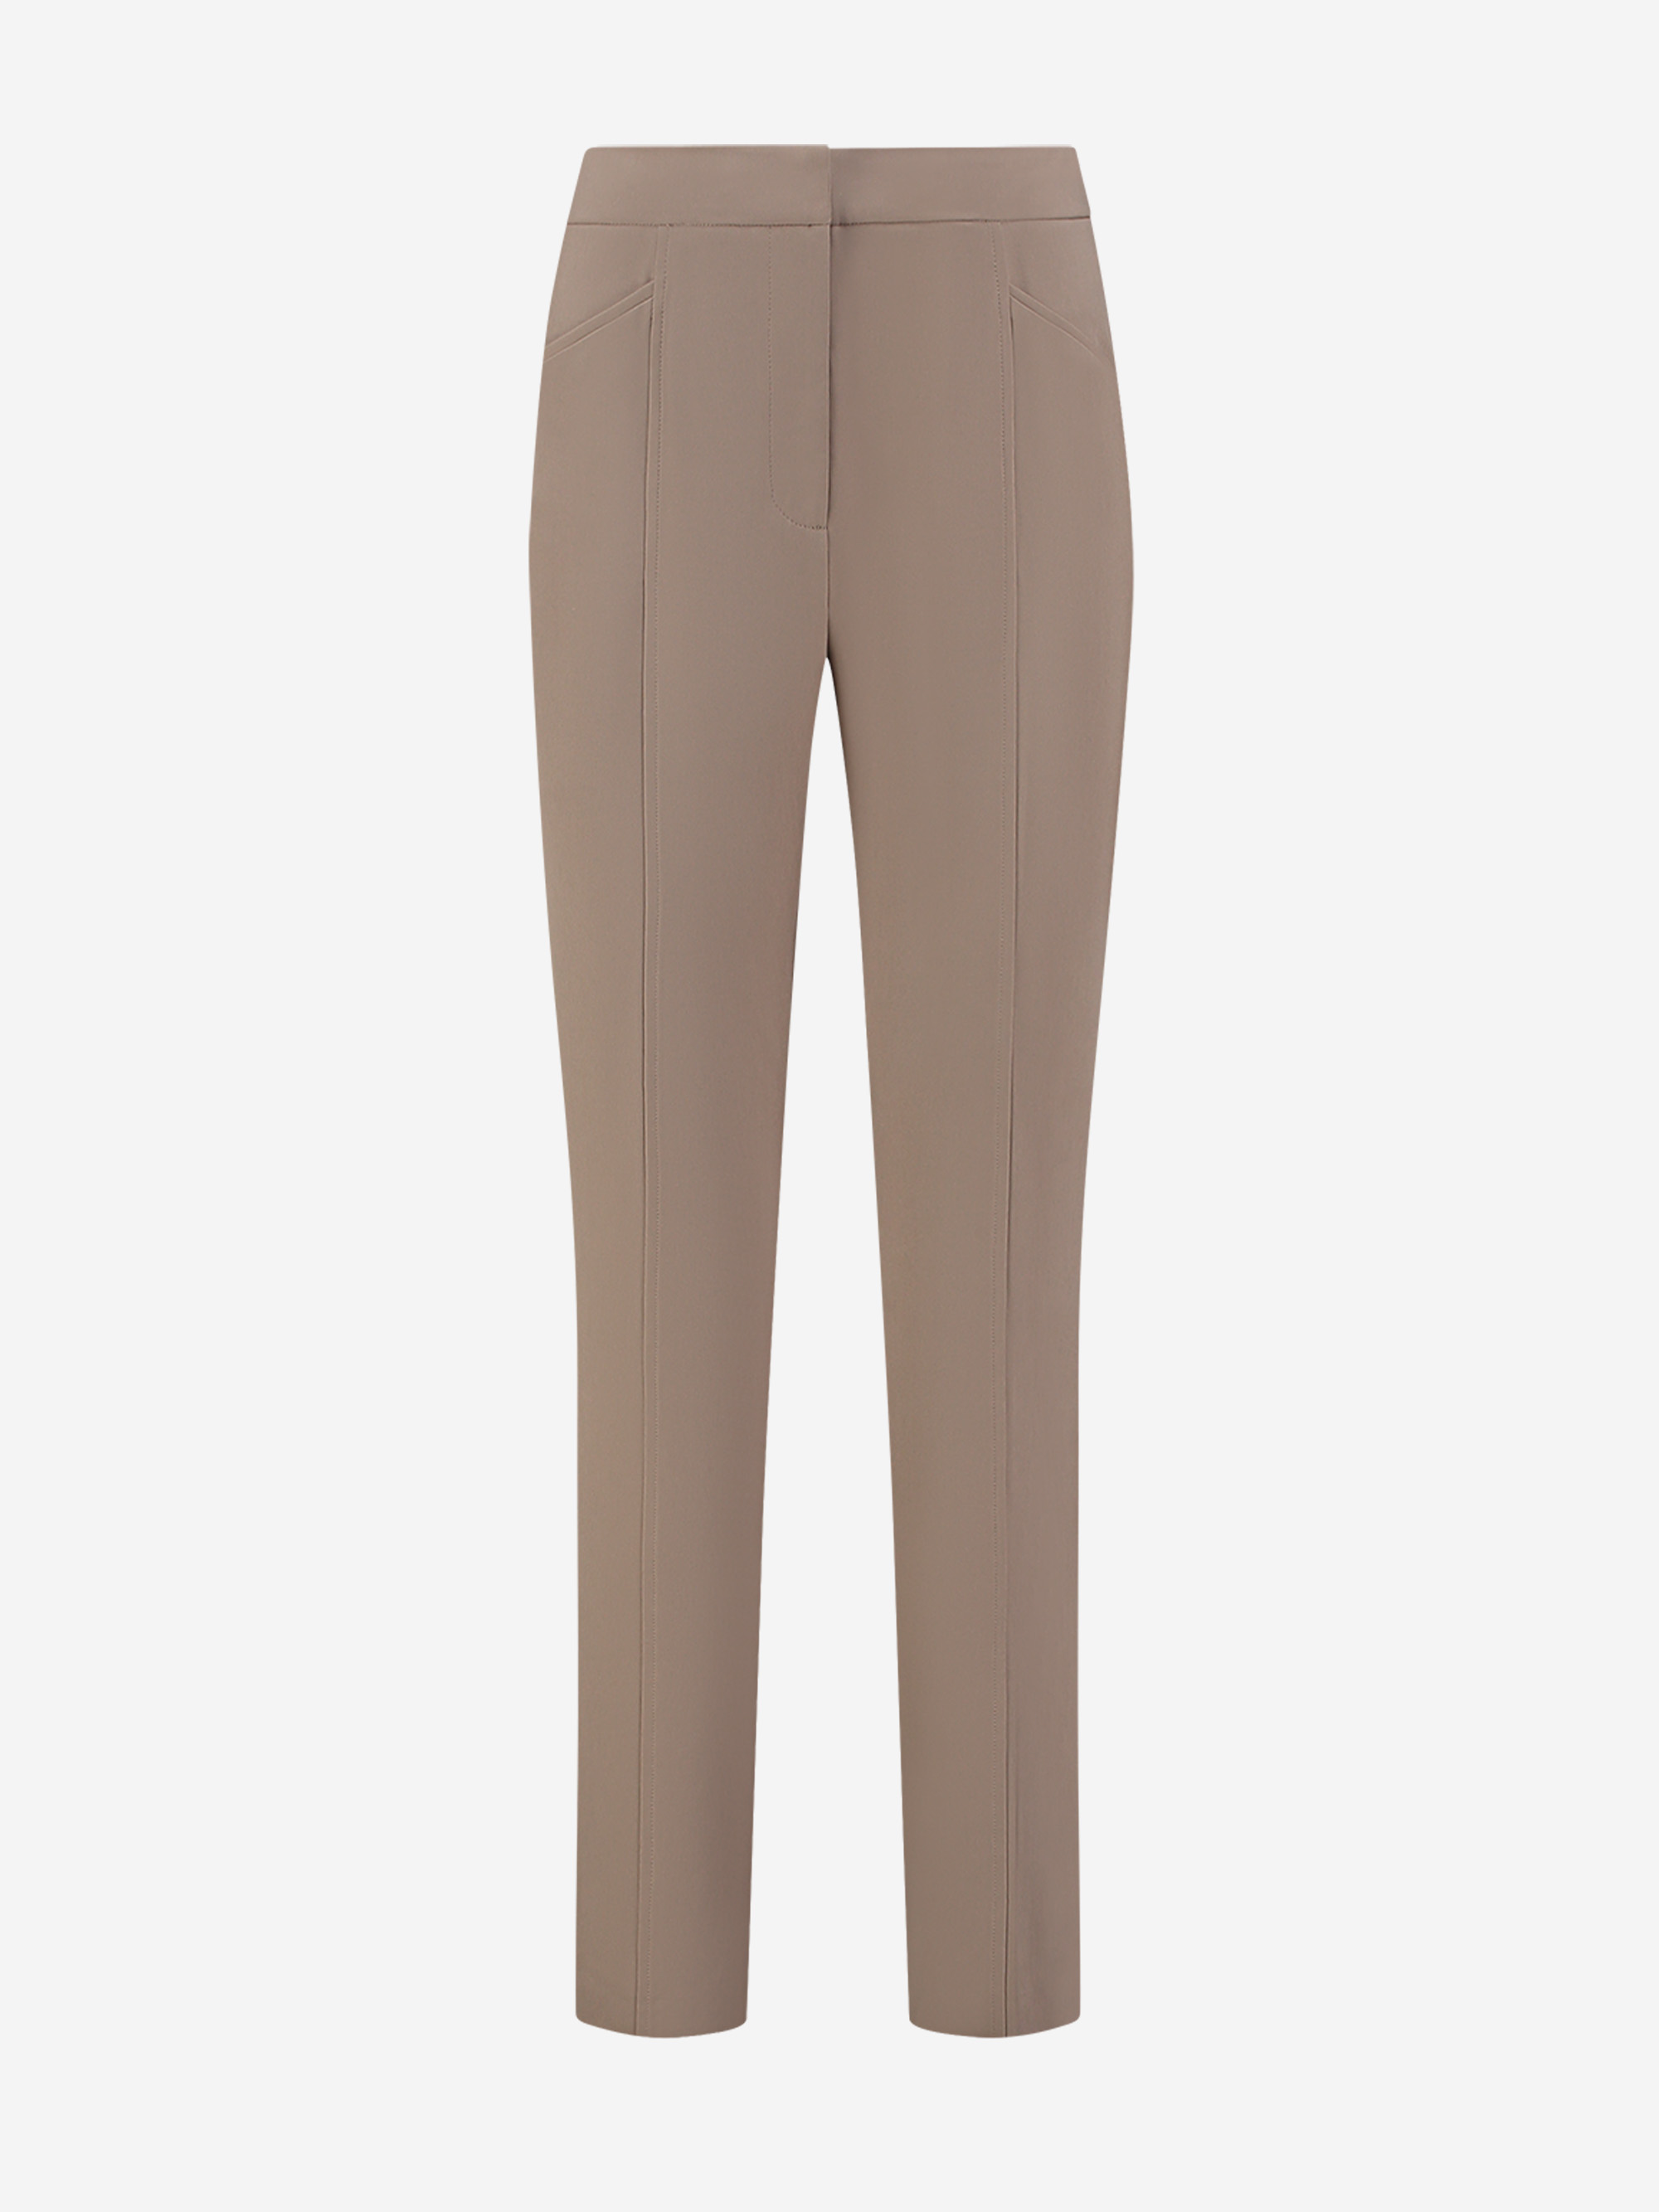 Fitted trousers